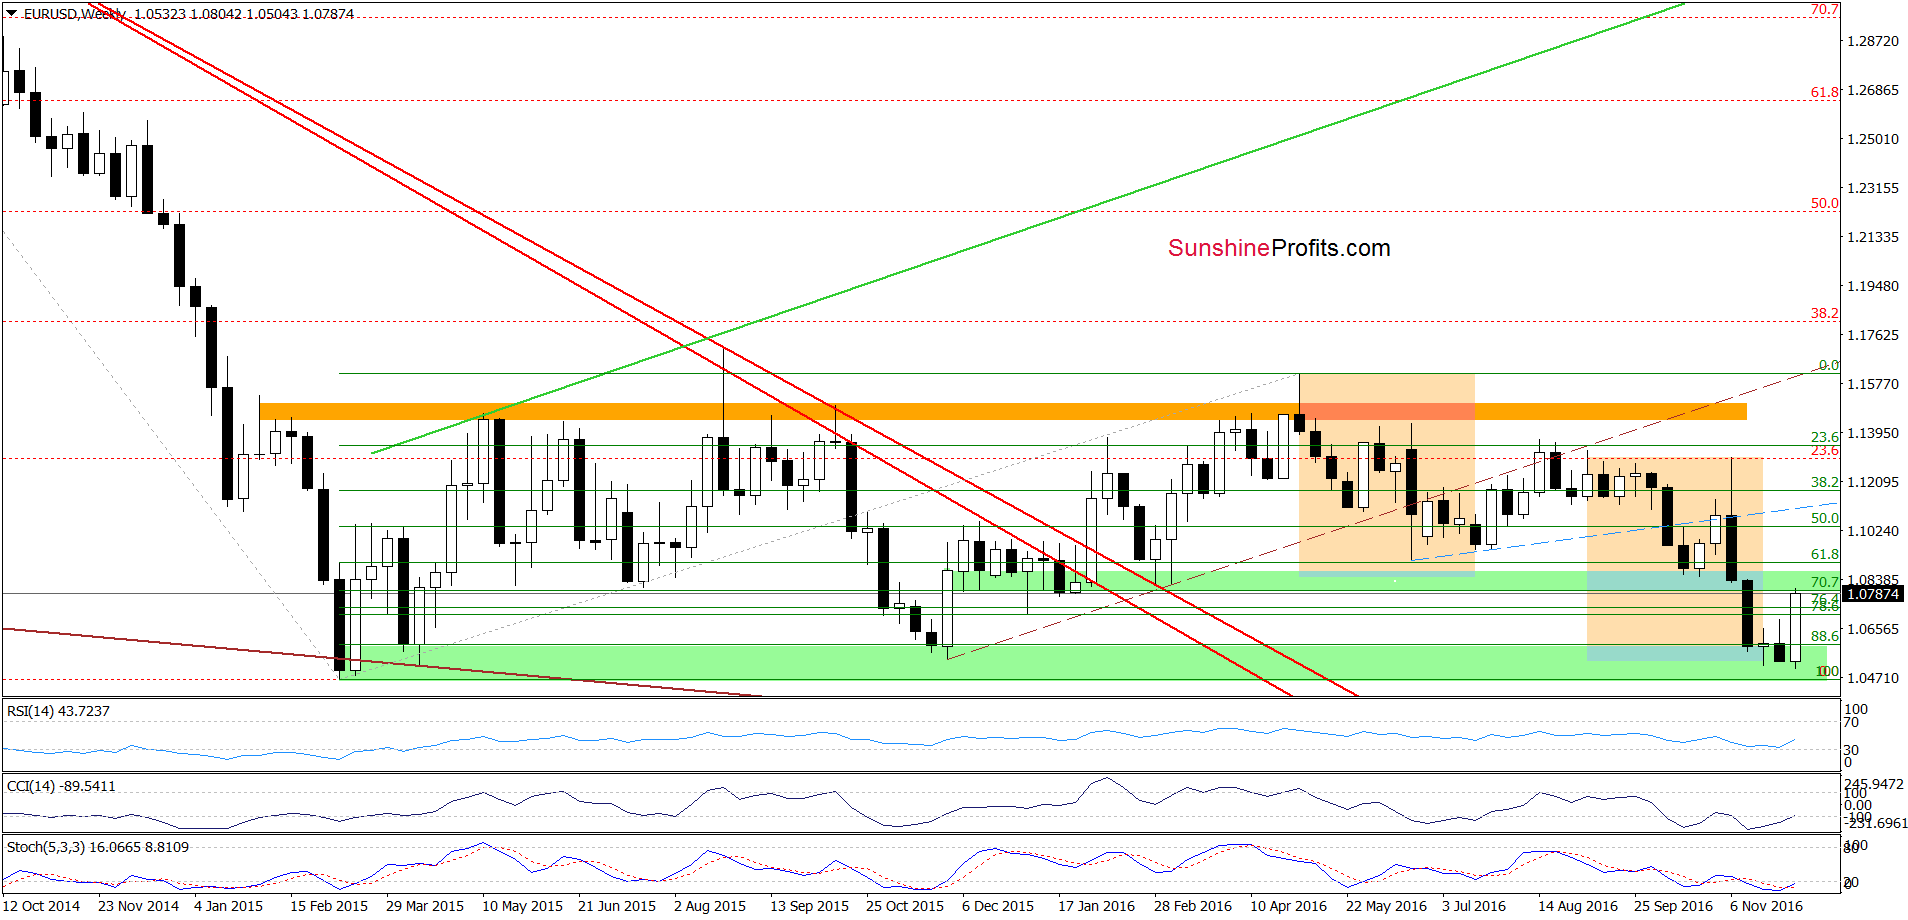 EUR/USD - the weekly chart